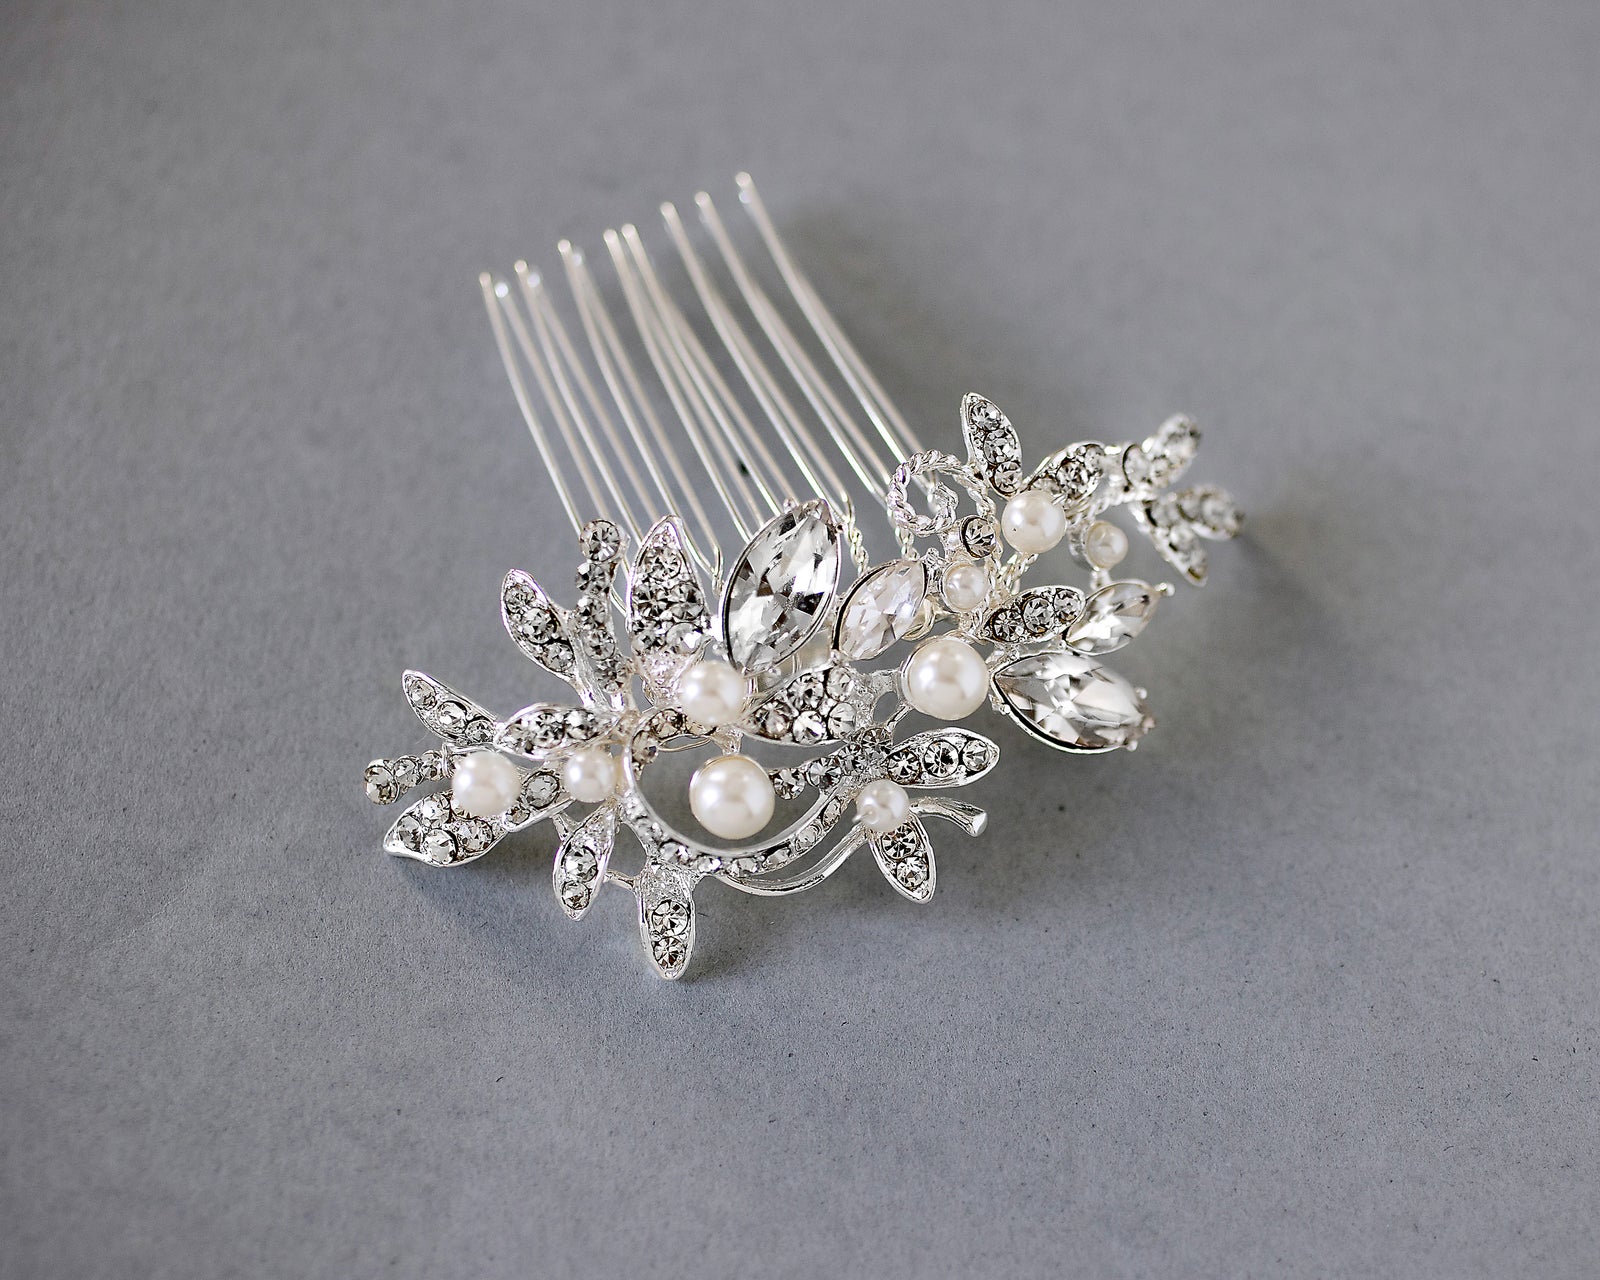 Small Wedding Comb with Pearls - Cassandra Lynne